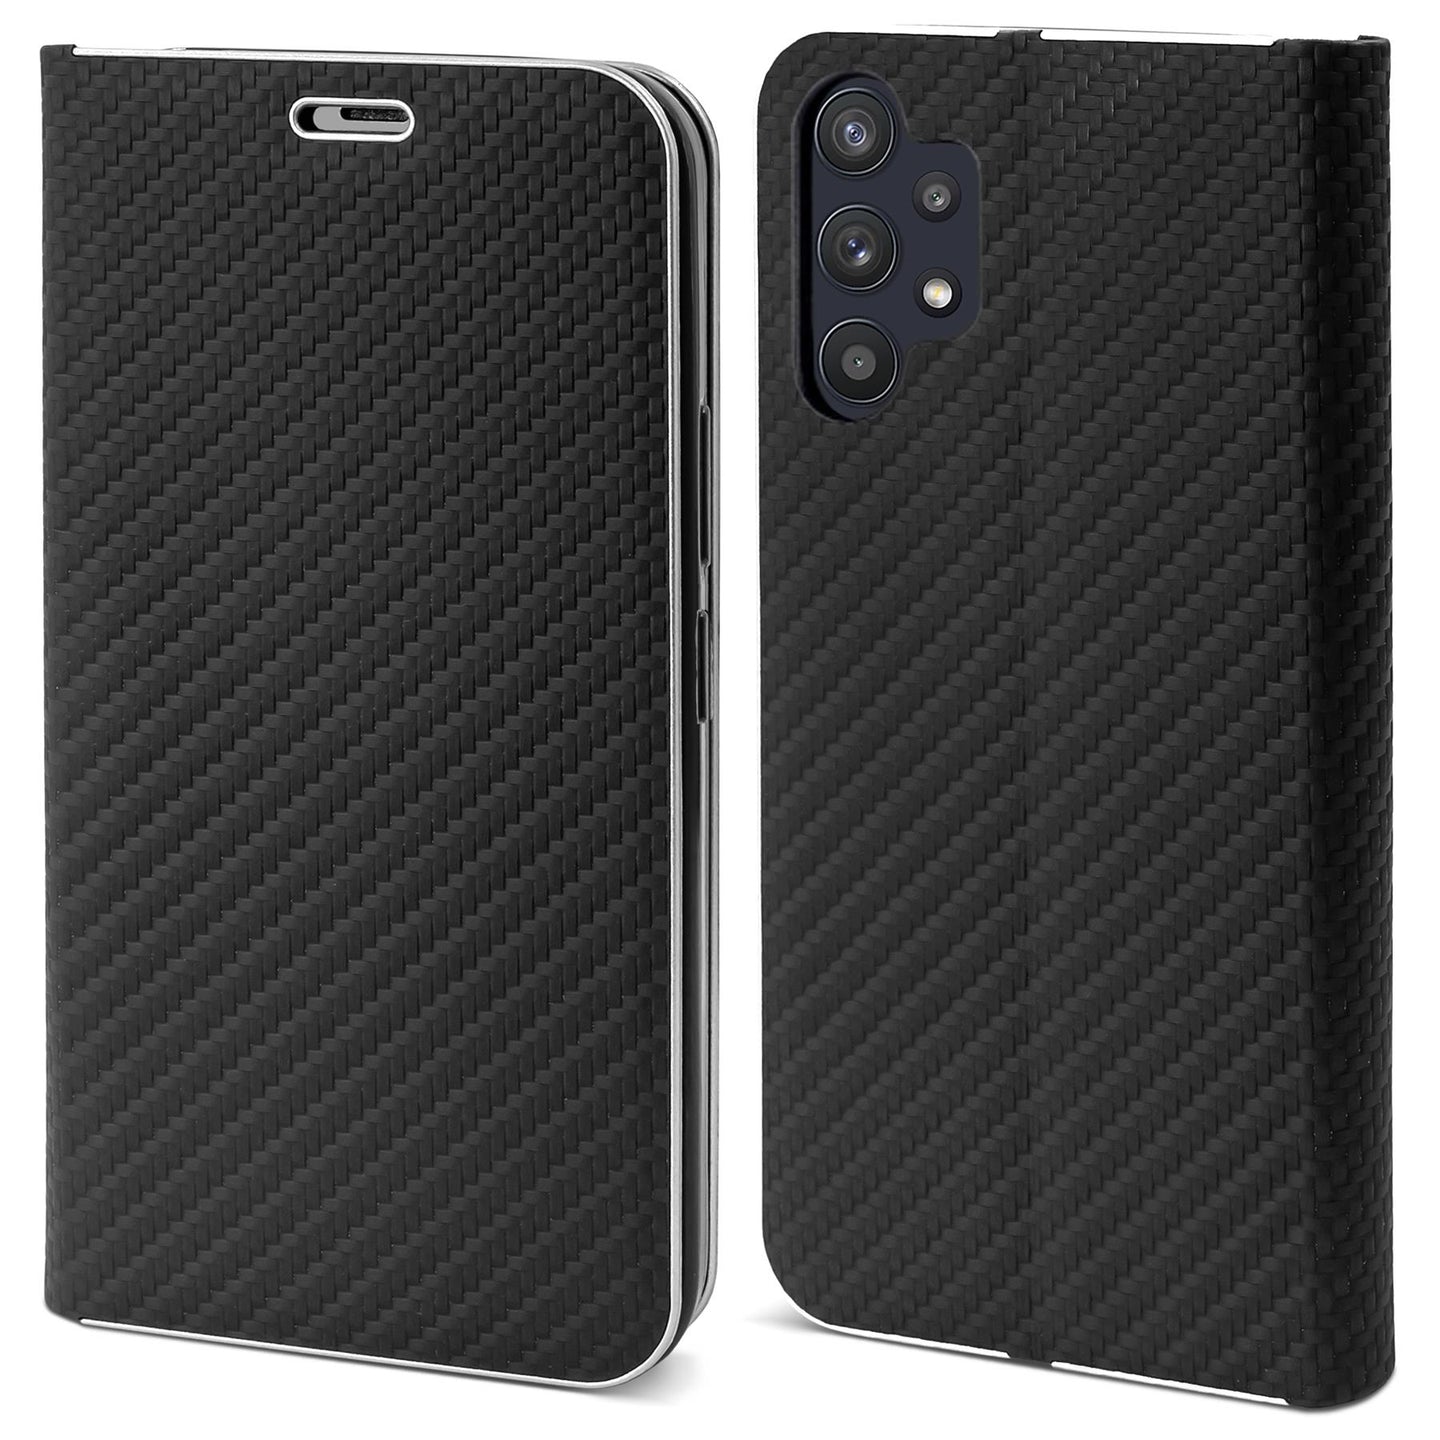 Moozy Wallet Case for Samsung A32 5G, Black Carbon - Flip Case with Metallic Border Design Magnetic Closure Flip Cover with Card Holder and Kickstand Function